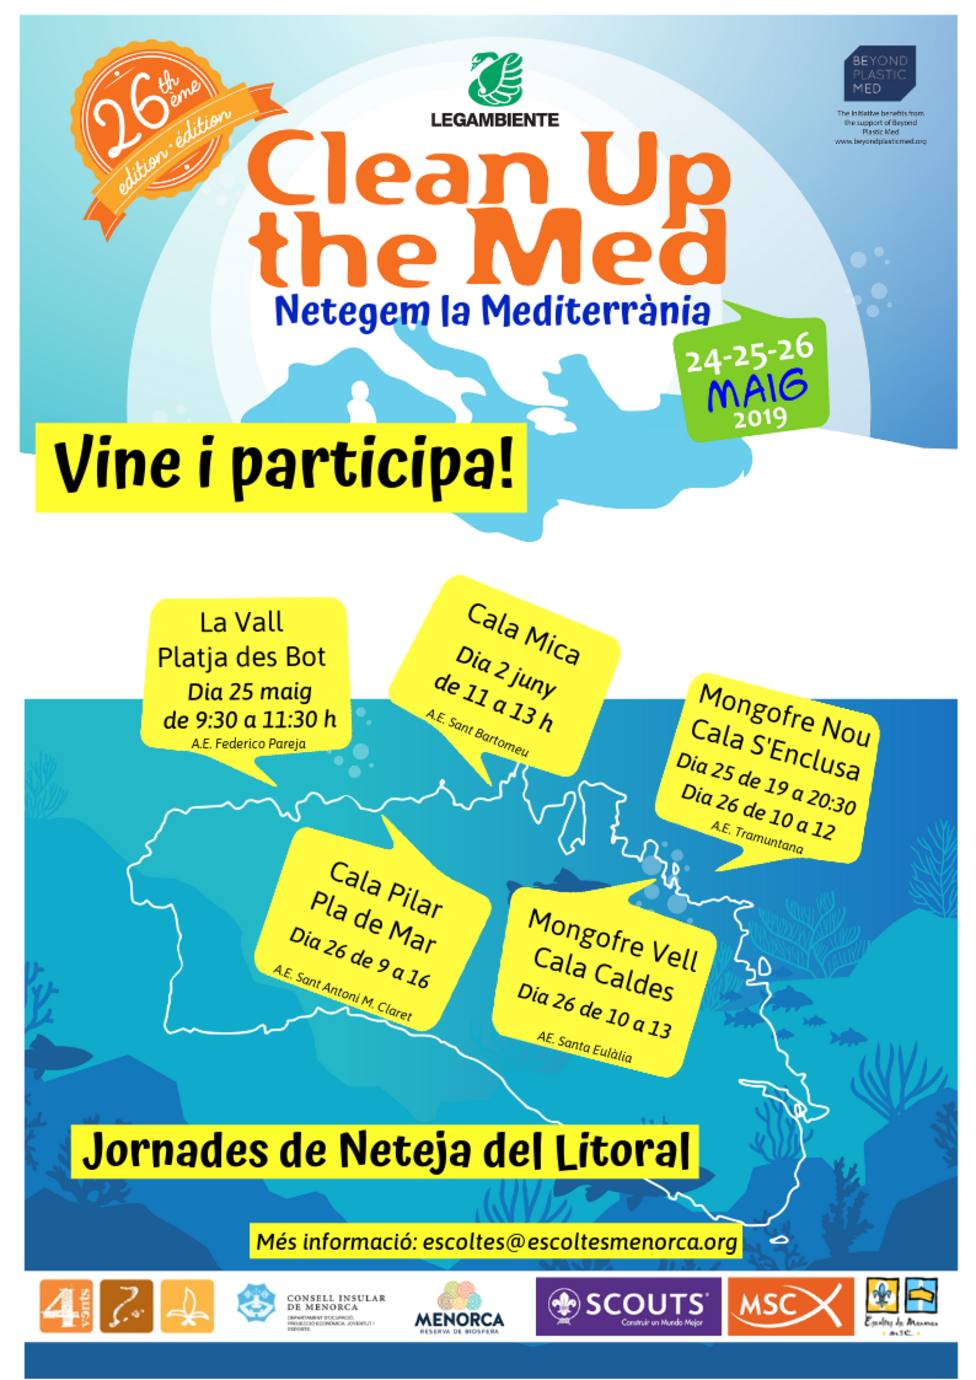 CAMPAÑA CLEAN UP THE MED Menorca 2019